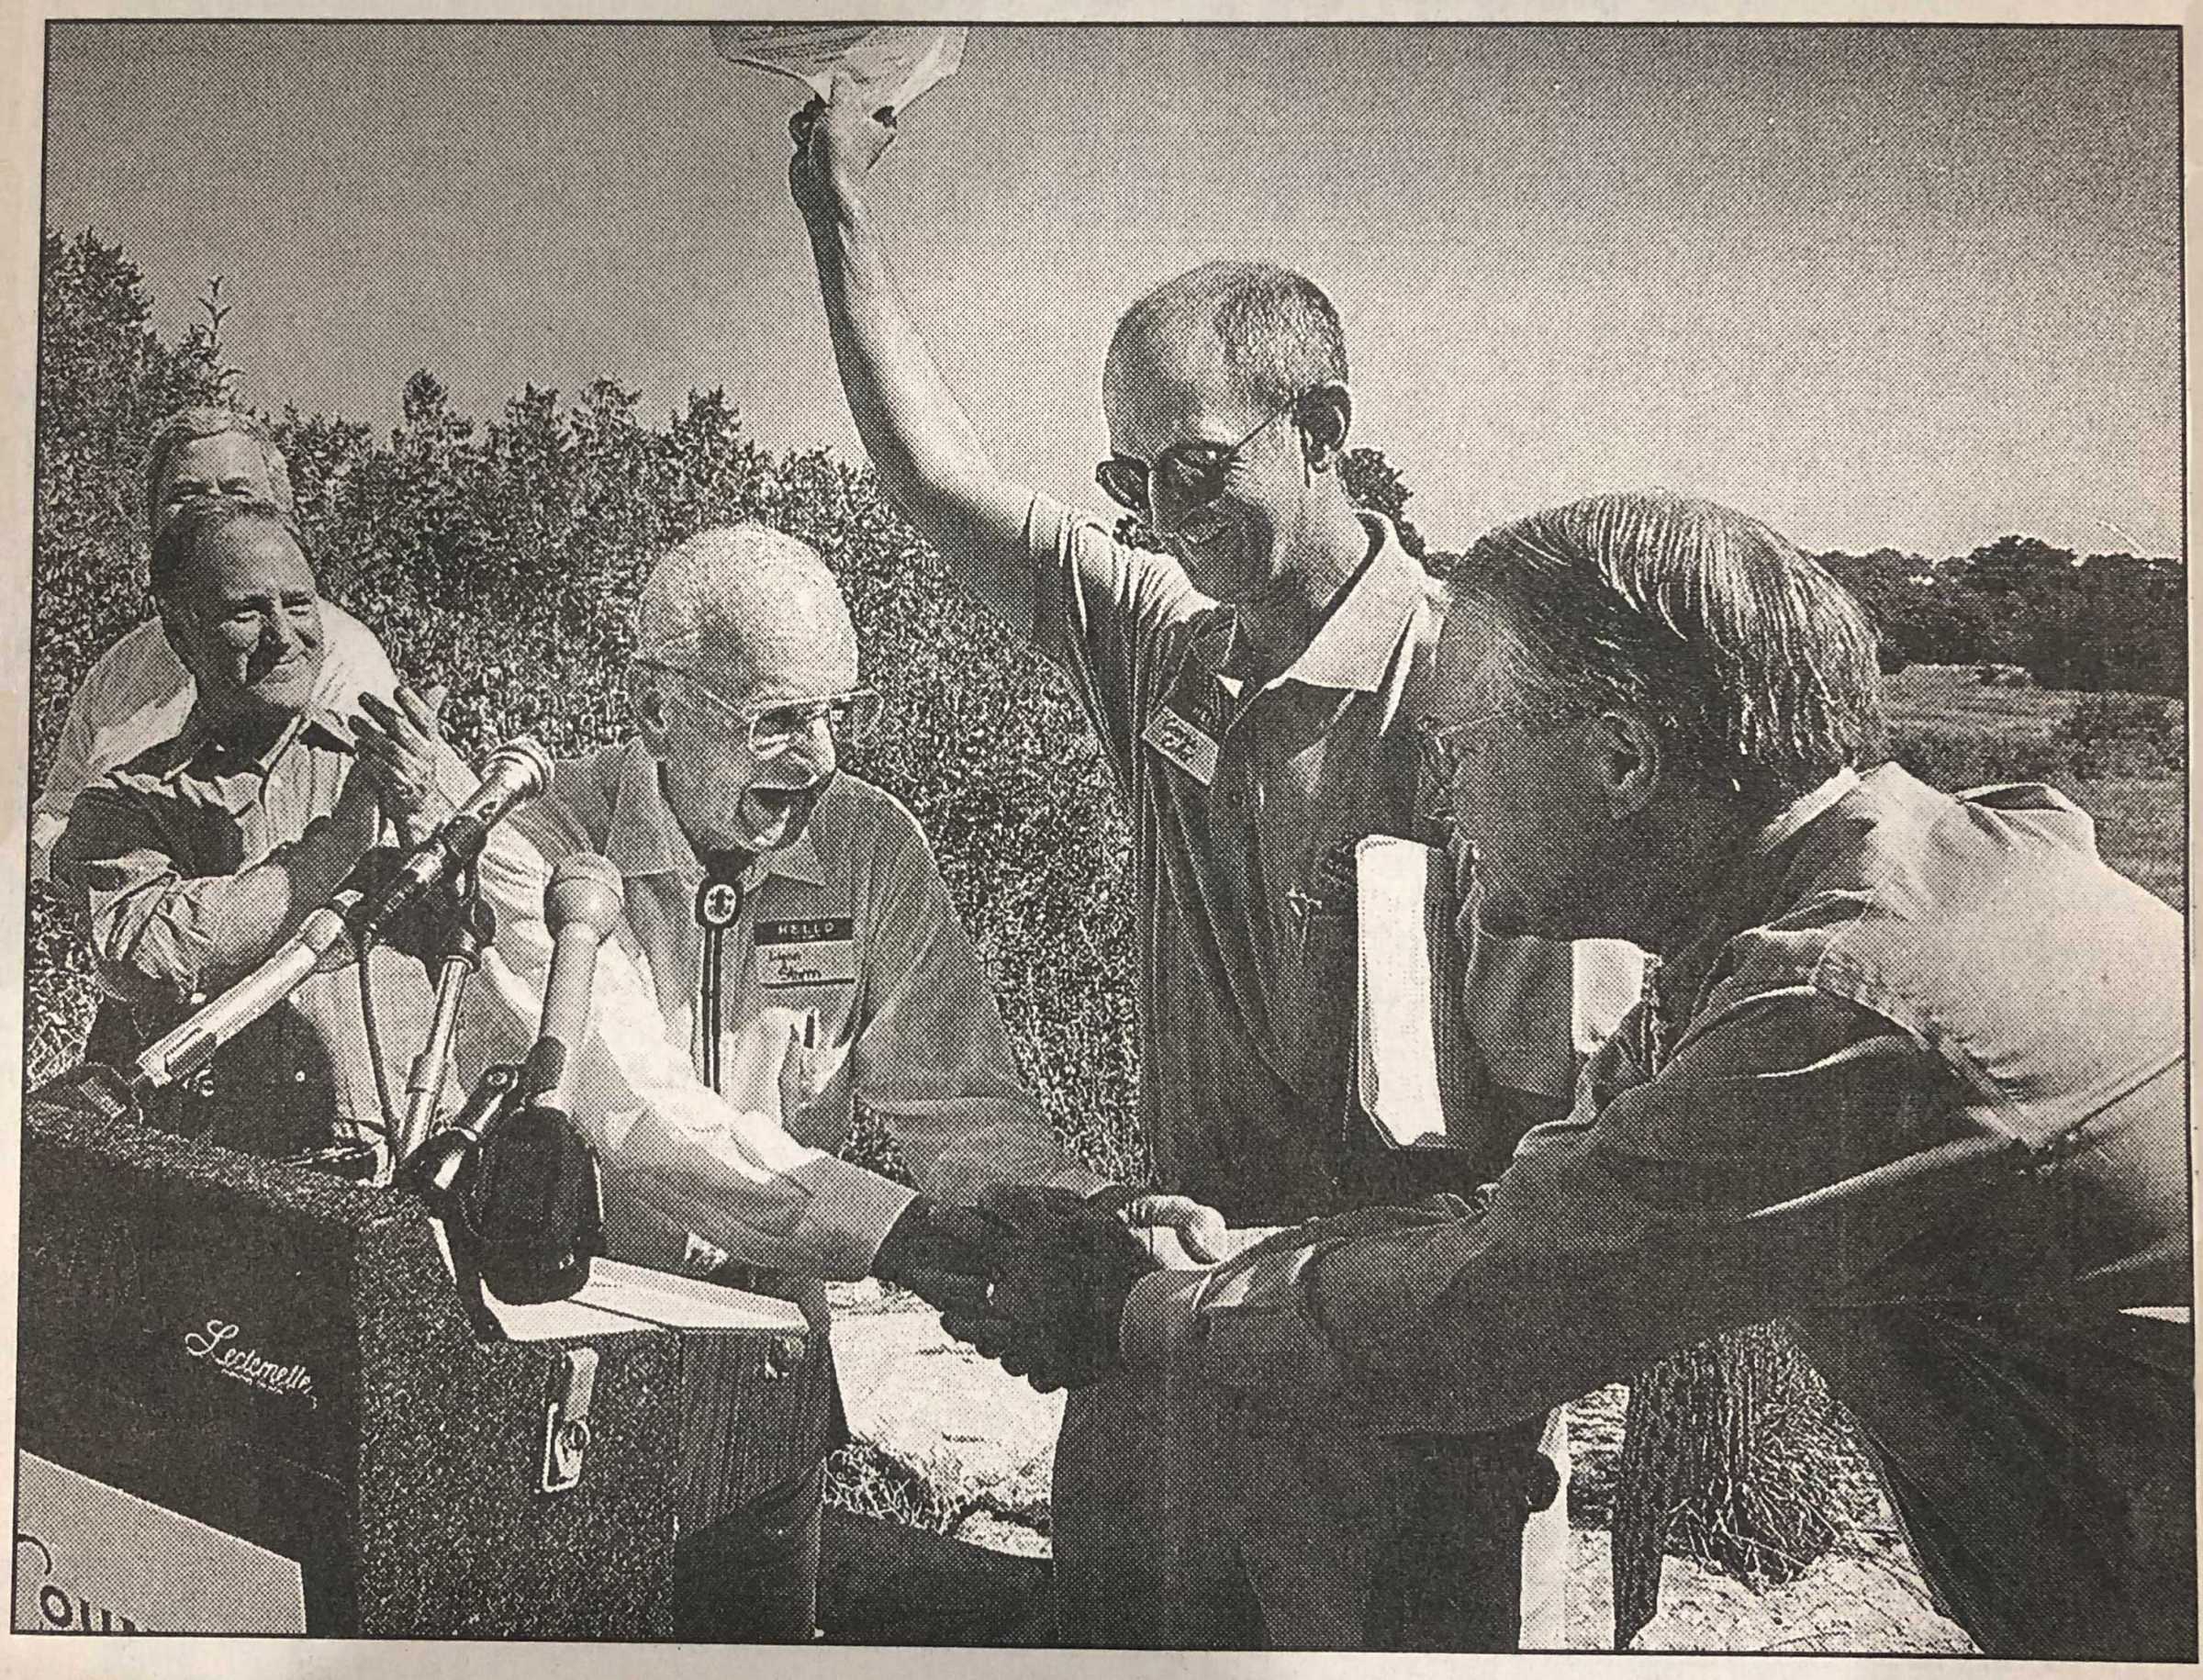 Hill Country Conservancy Founder George Cofer Celebrates Purchase of Storm Ranch (Austin American-Statesman, September 7, 2000)